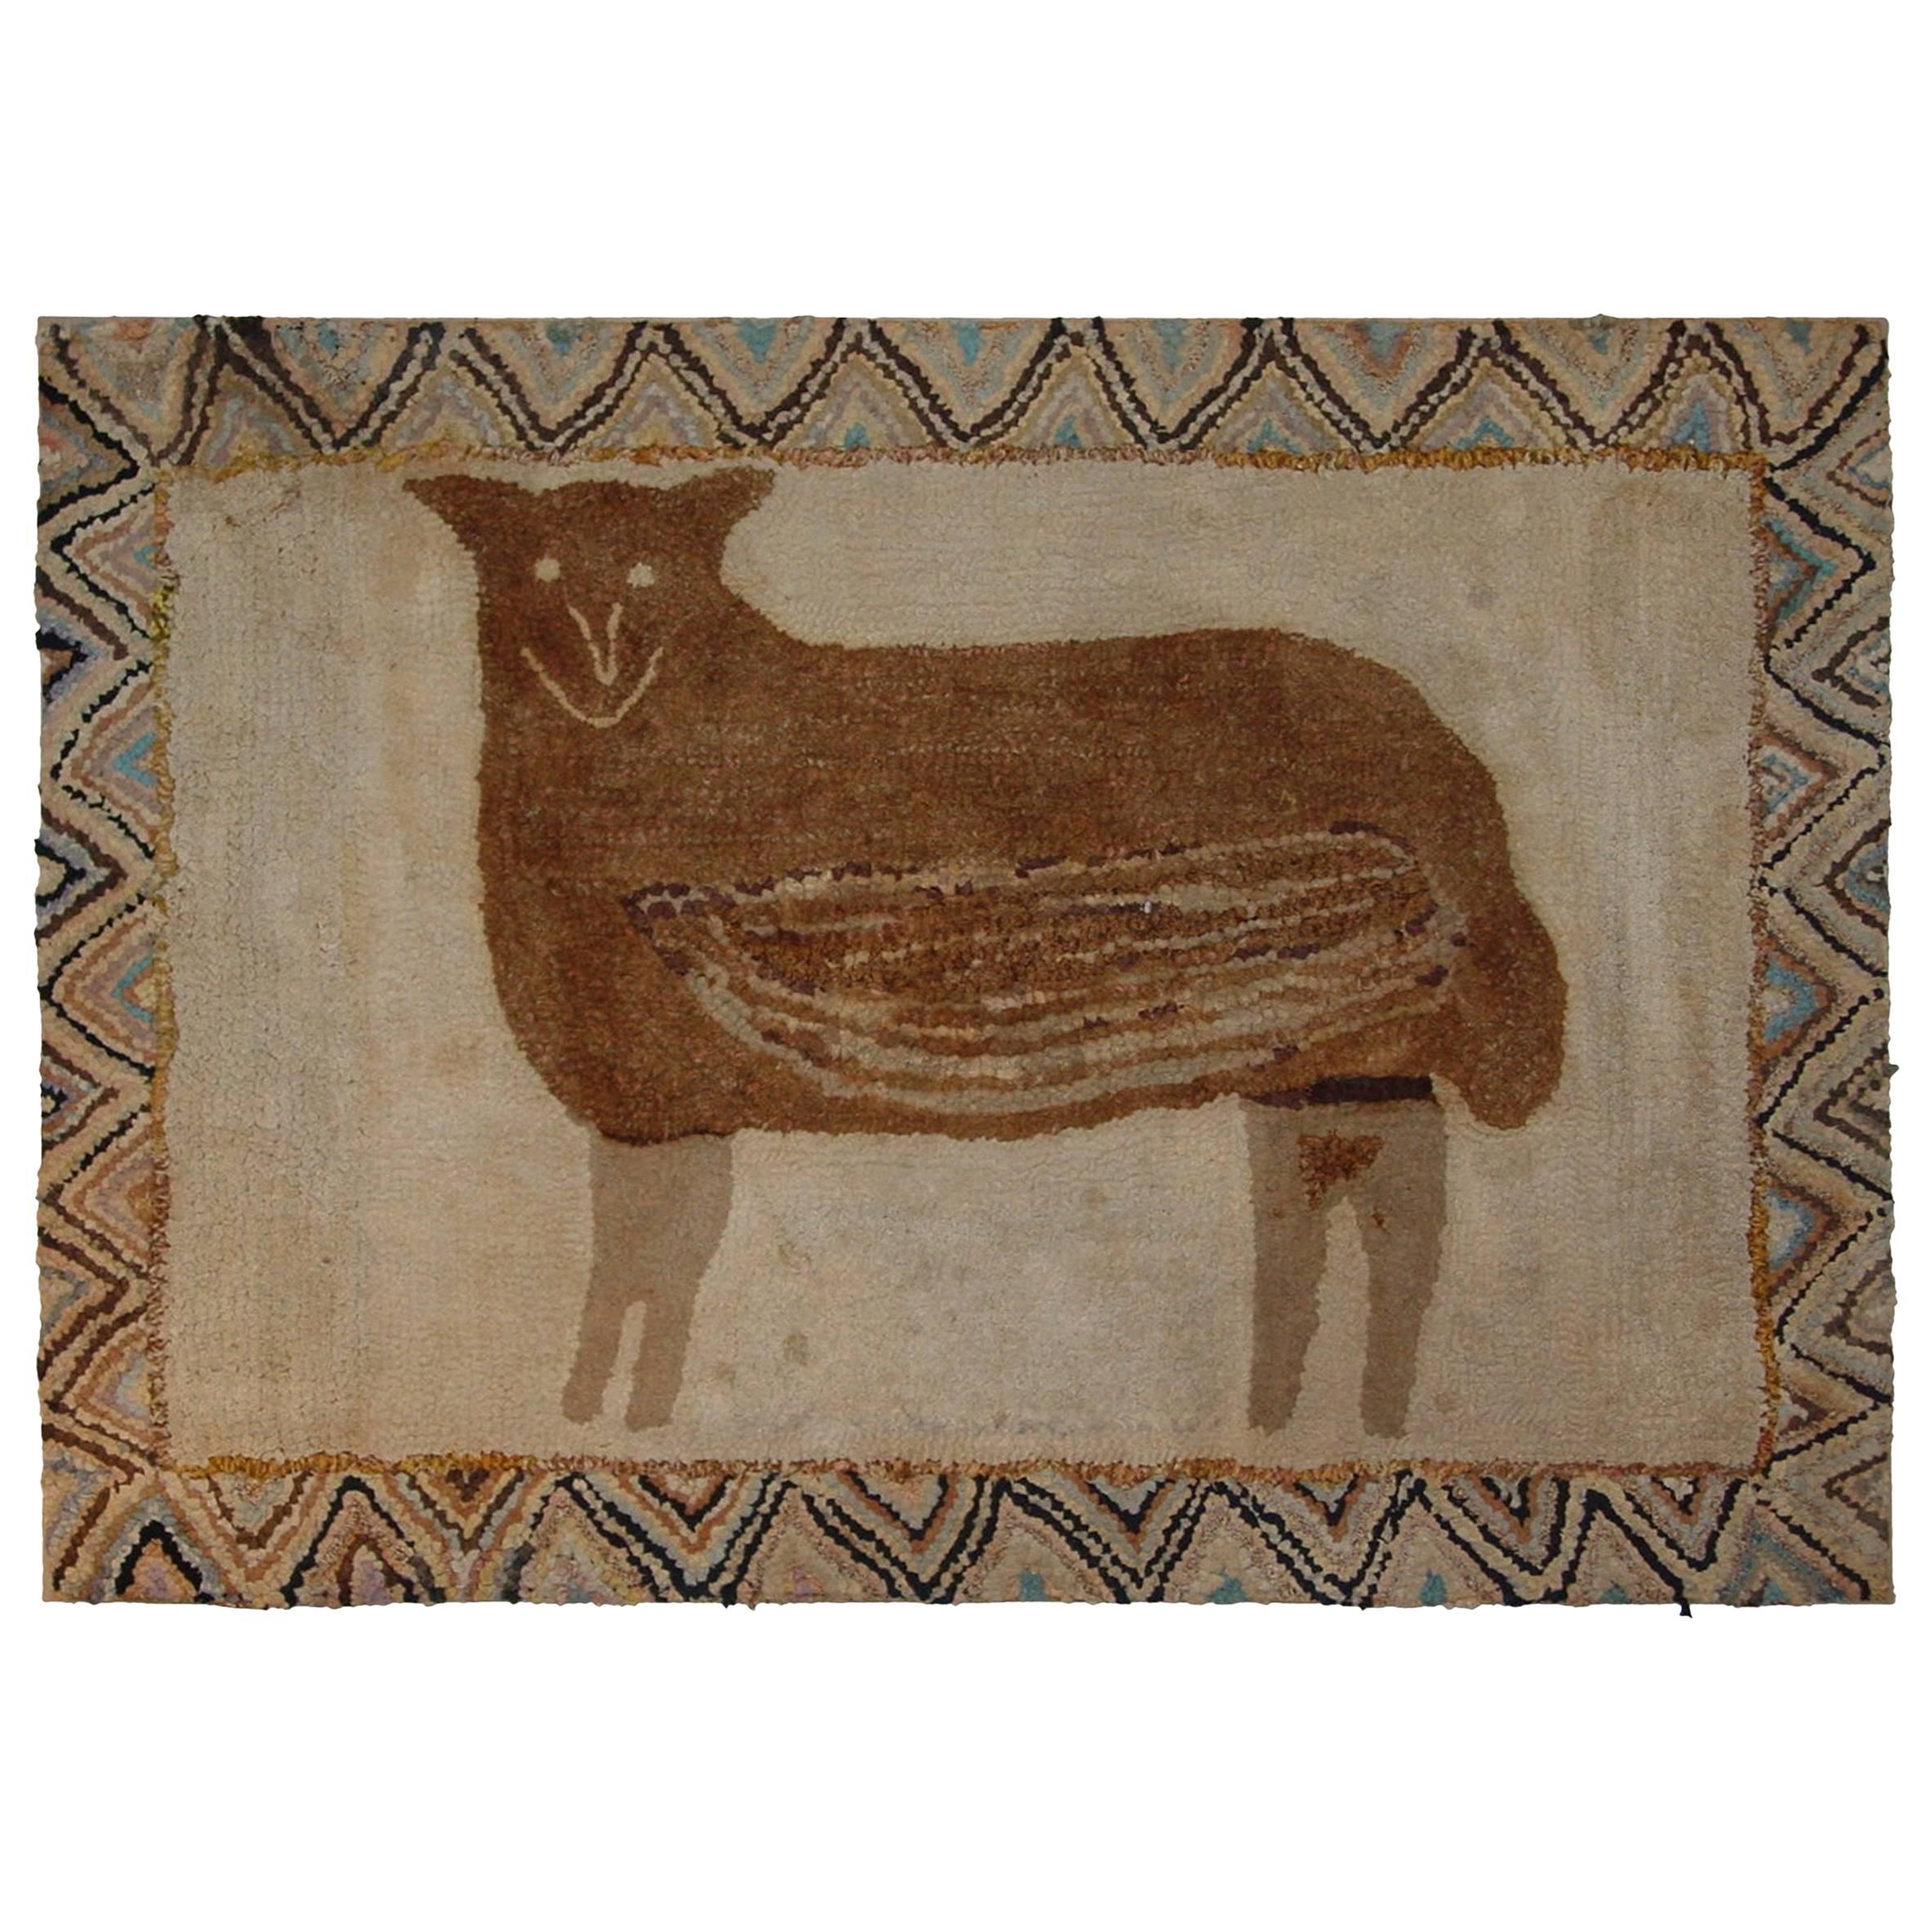 Hooked Rug of a Sheep For Sale